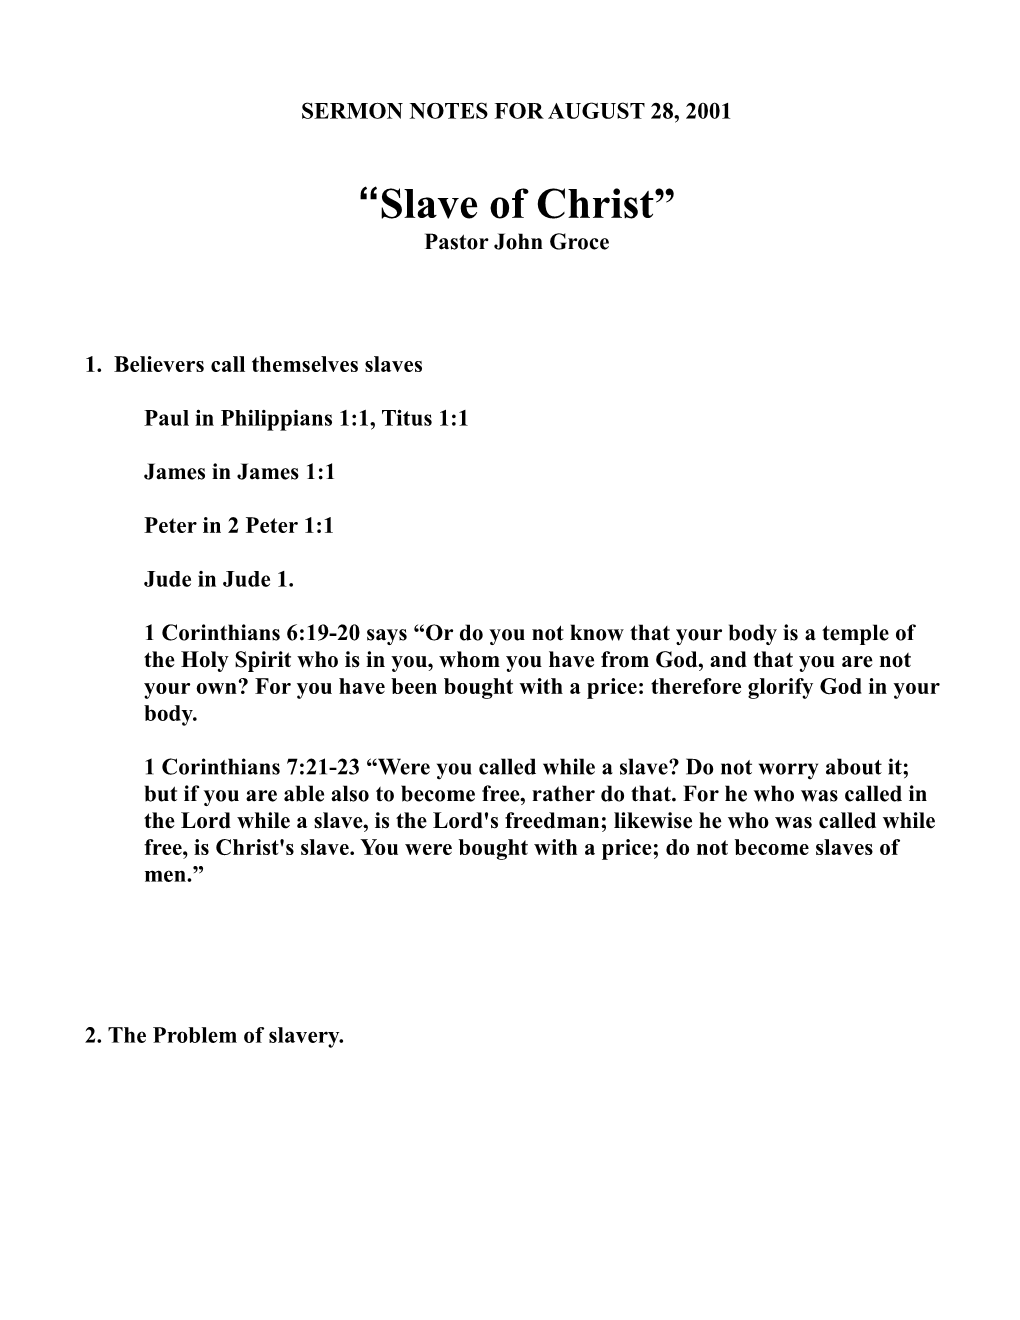 Sermon Notes for August 7, 2001